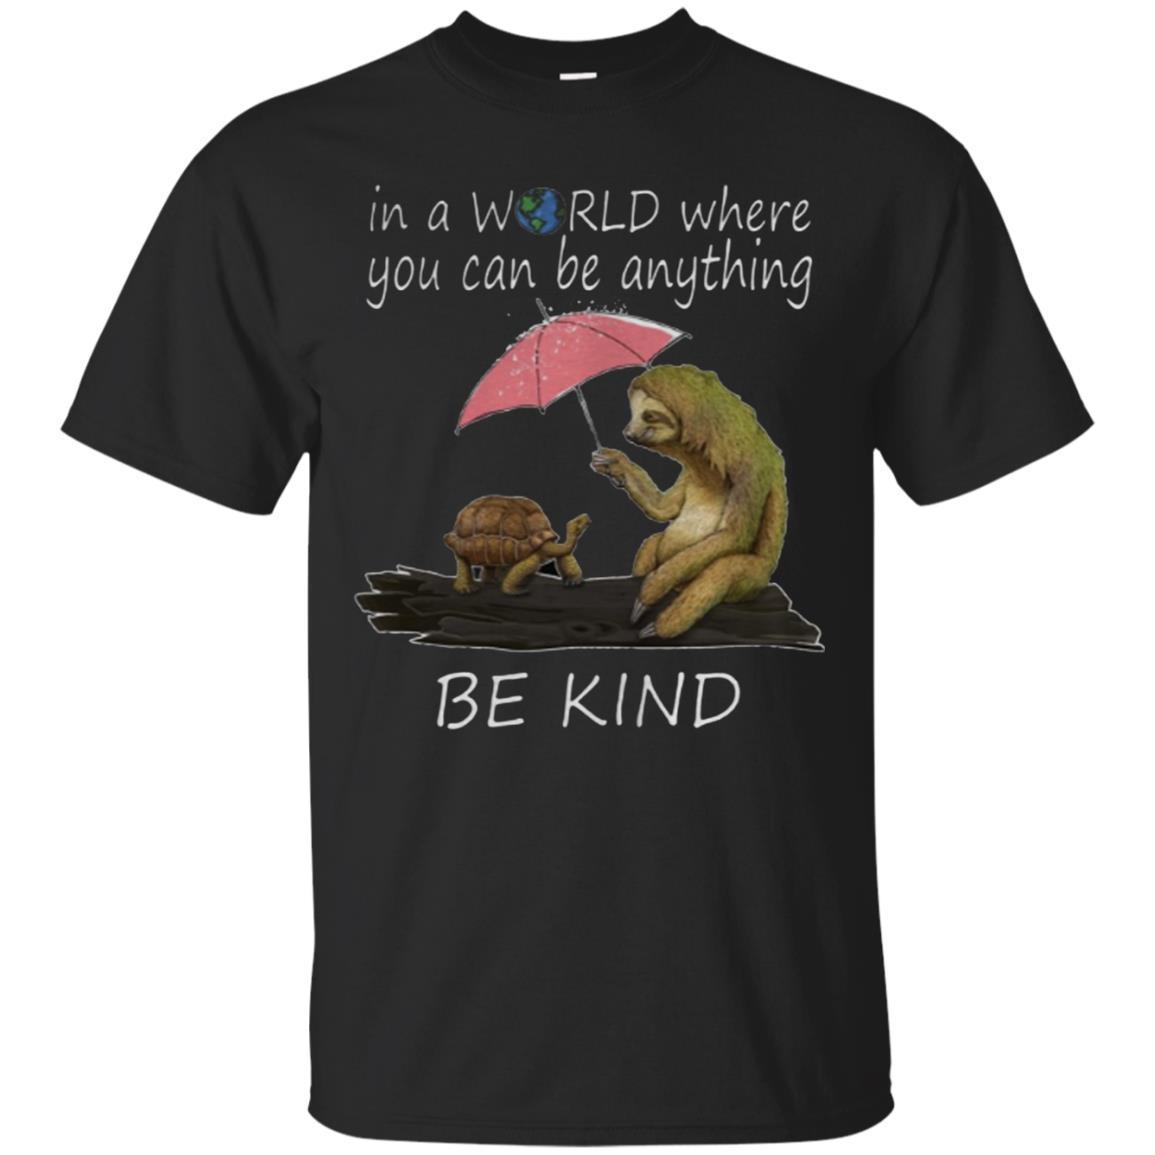  Buy Sloth And Turtle In A World Where You Can Be Anything Be Kind Shirt